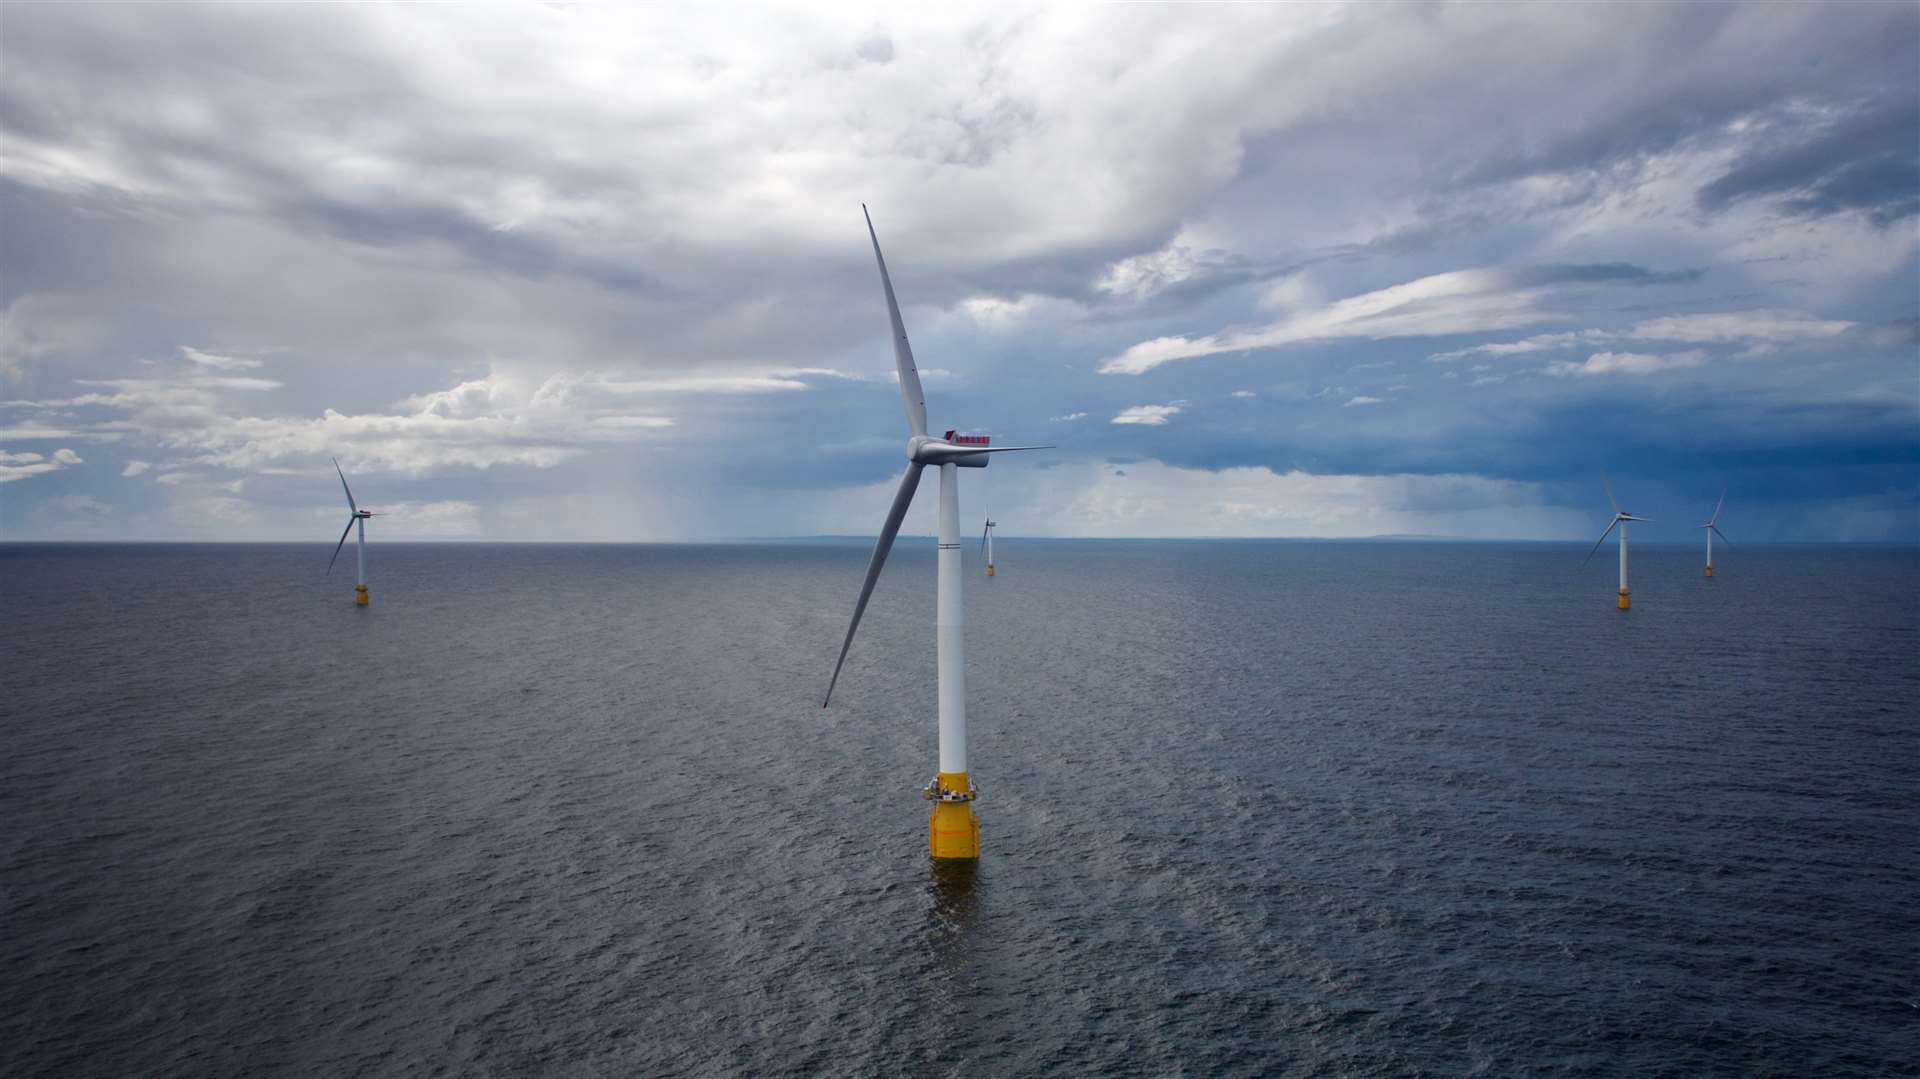 Hywind Scotland off the coast of Peterhead is the first commercial floating wind farm in the world.